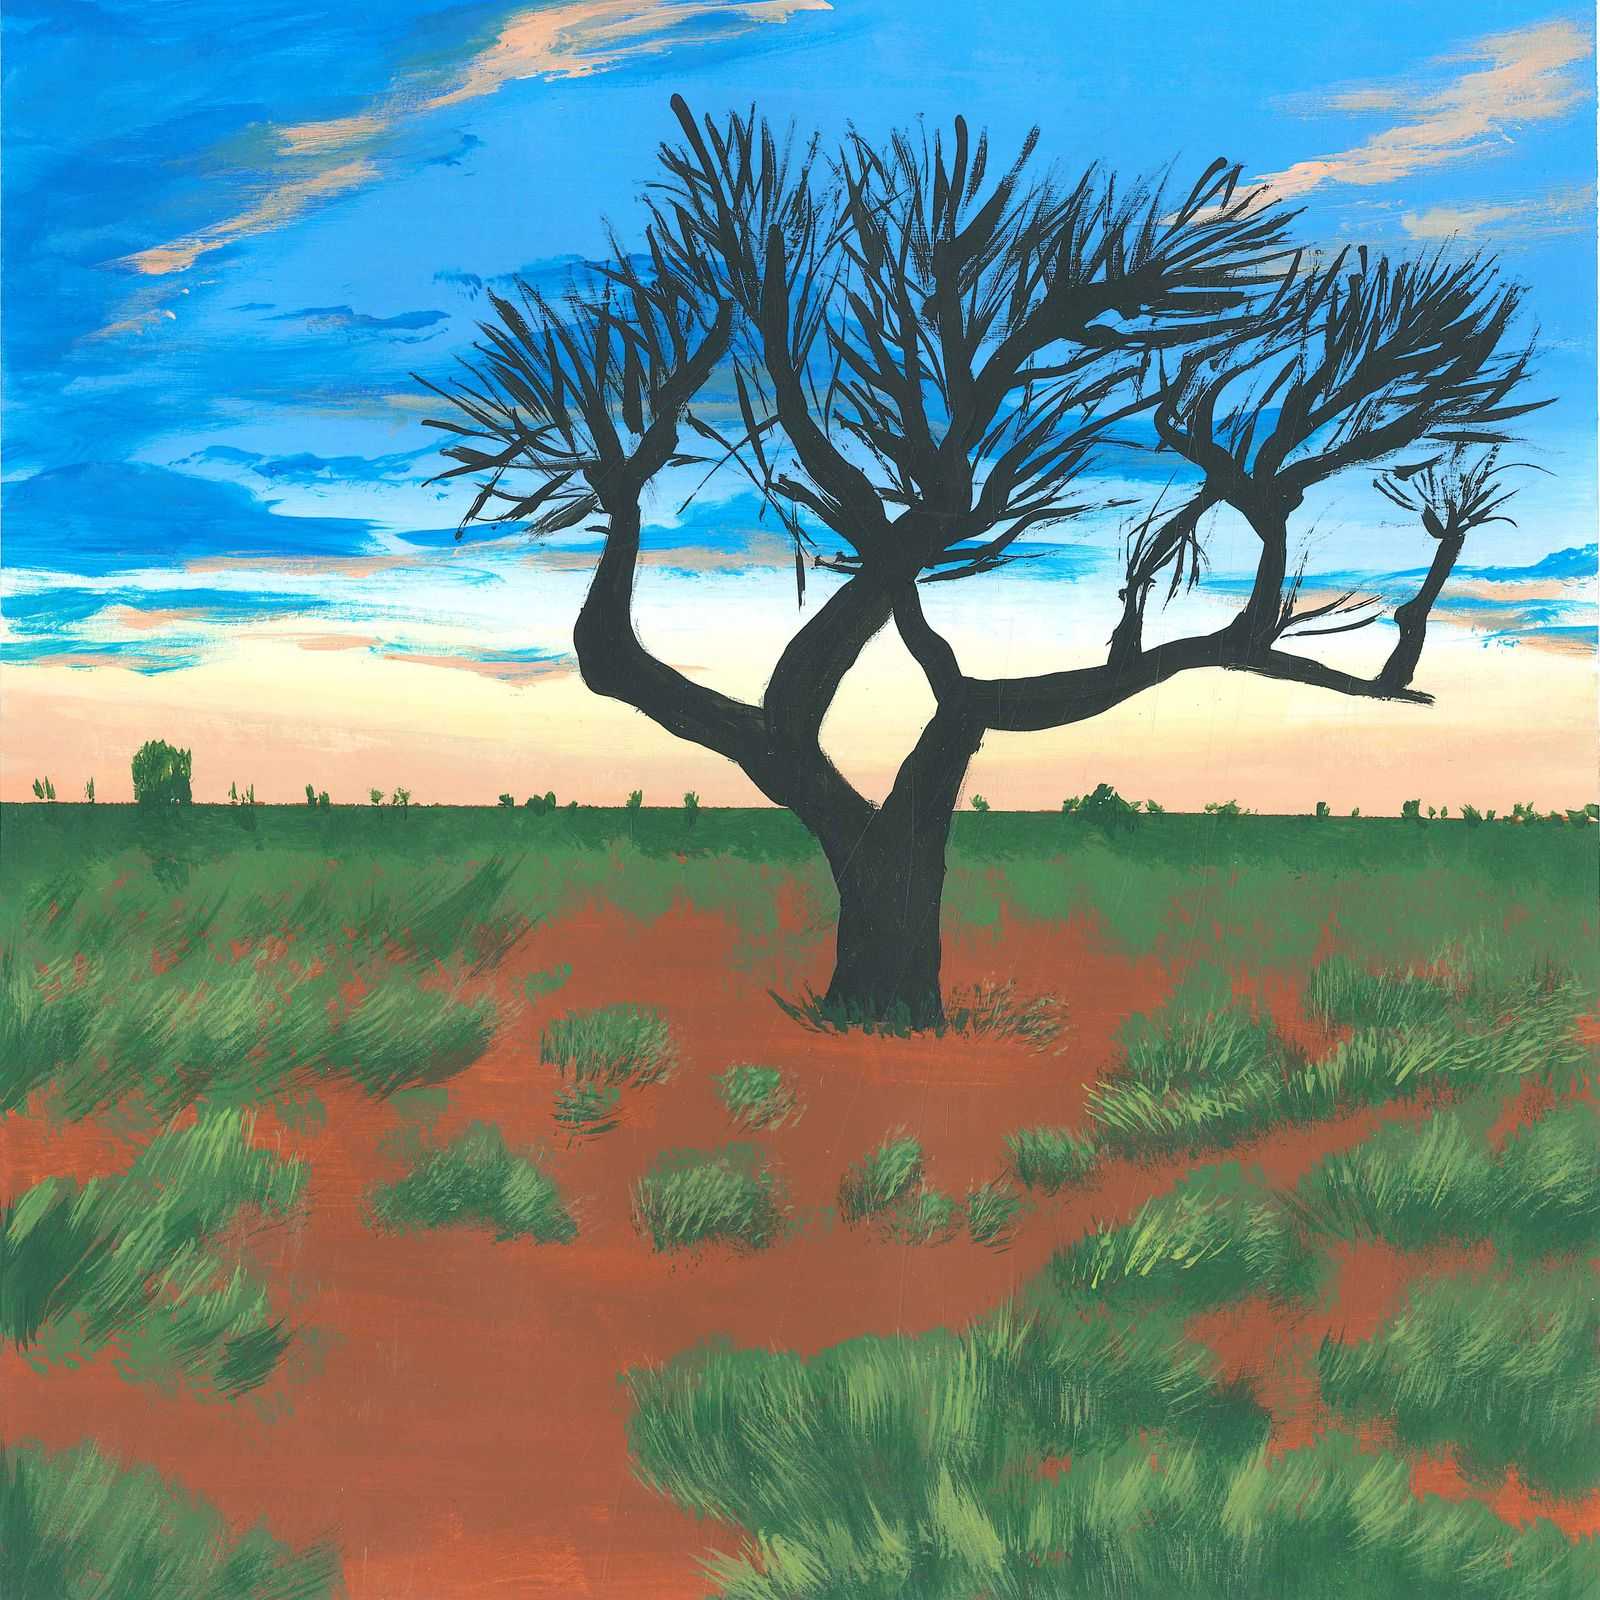 Dry Creek Bed in the Outback - nature soundscape - earth.fm